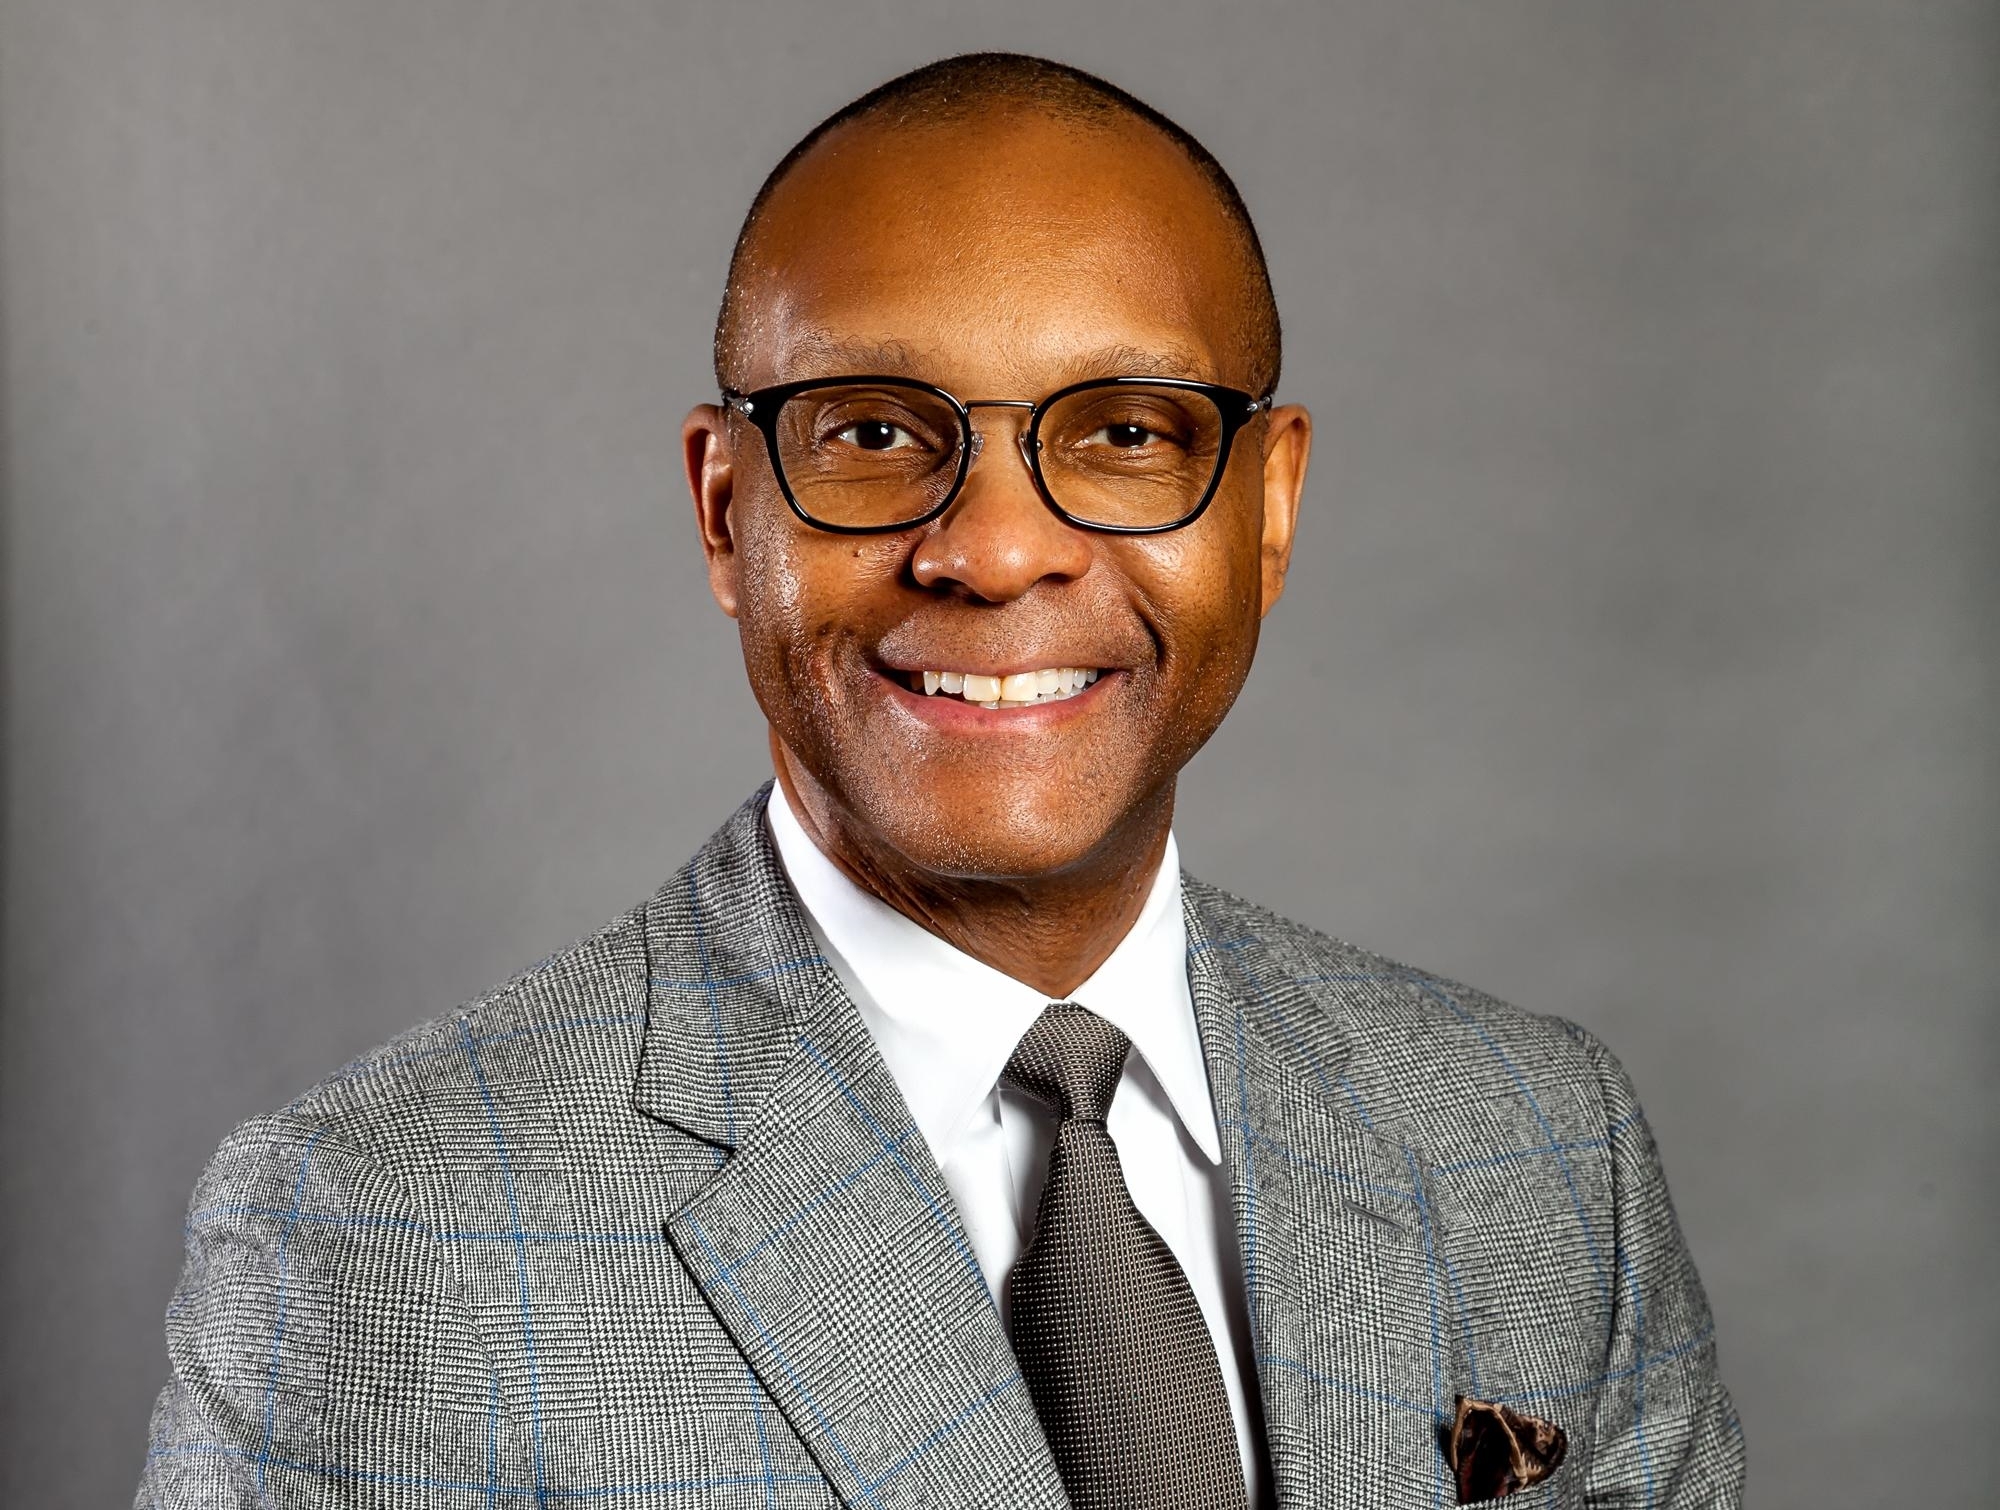 Announcing our new CEO DePriest Waddy